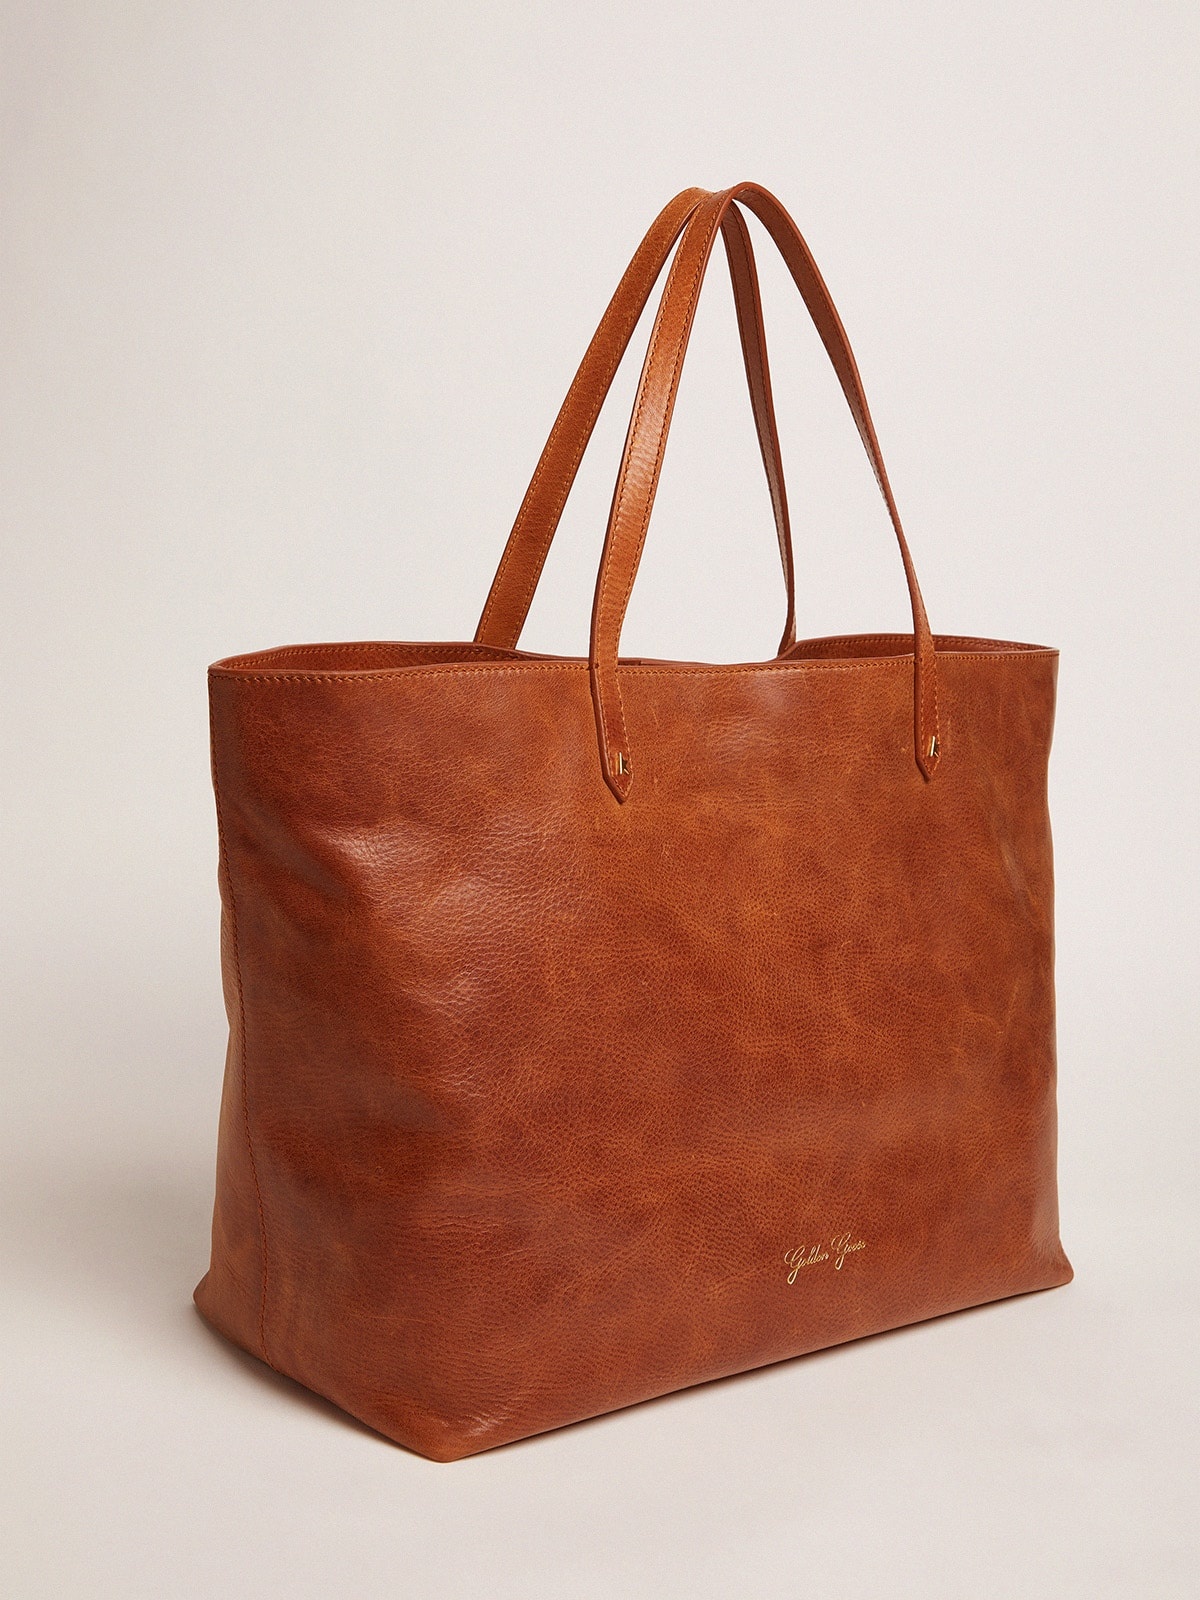 Pasadena Bag in tan-colored glossy leather with gold logo on the front - 5